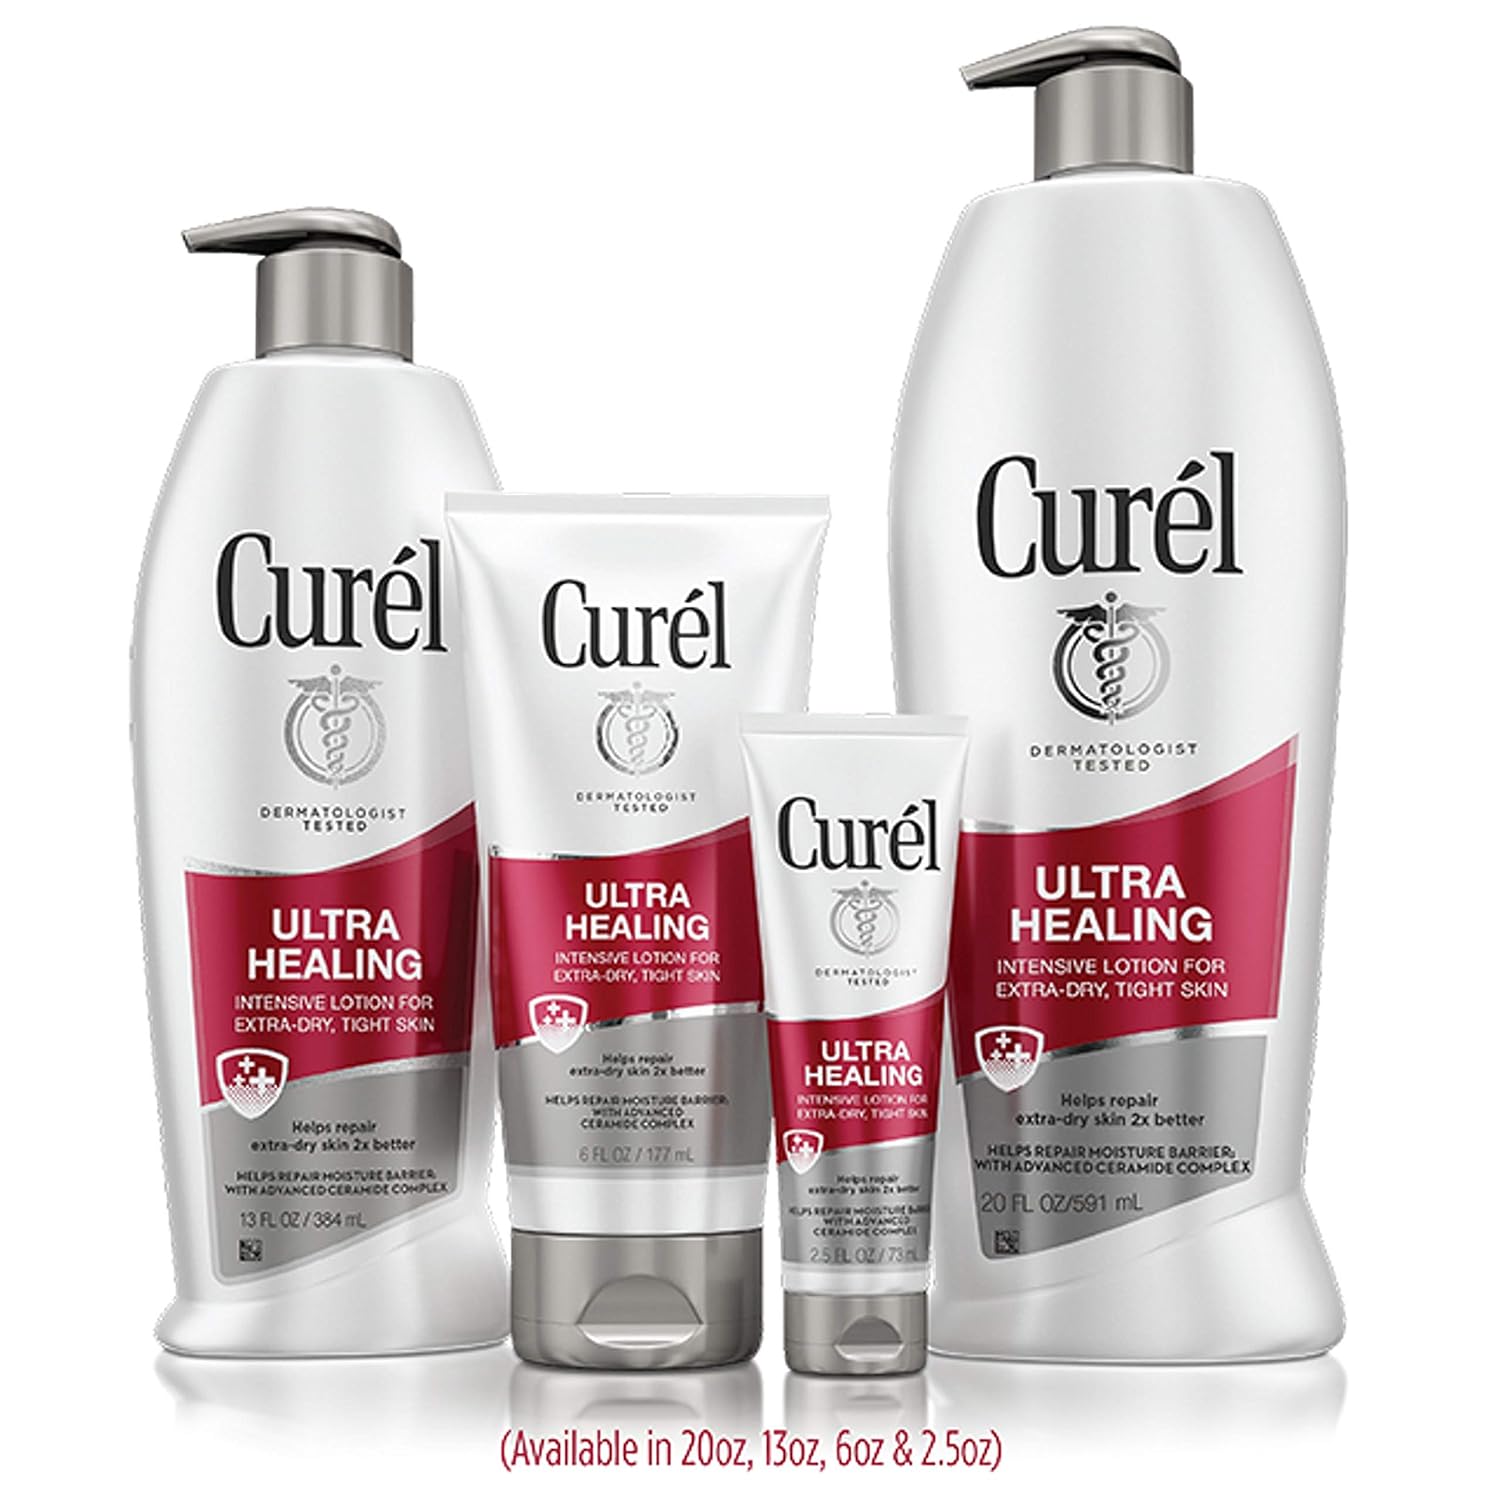 Curél Ultra Healing Body Lotion, Moisturizer for Extra Dry Skin, Body and Hand Lotion with Advanced Ceramide Complex and Hydrating Agents, 6 Ounce (Pack of 2) : Body Lotions : Beauty & Personal Care